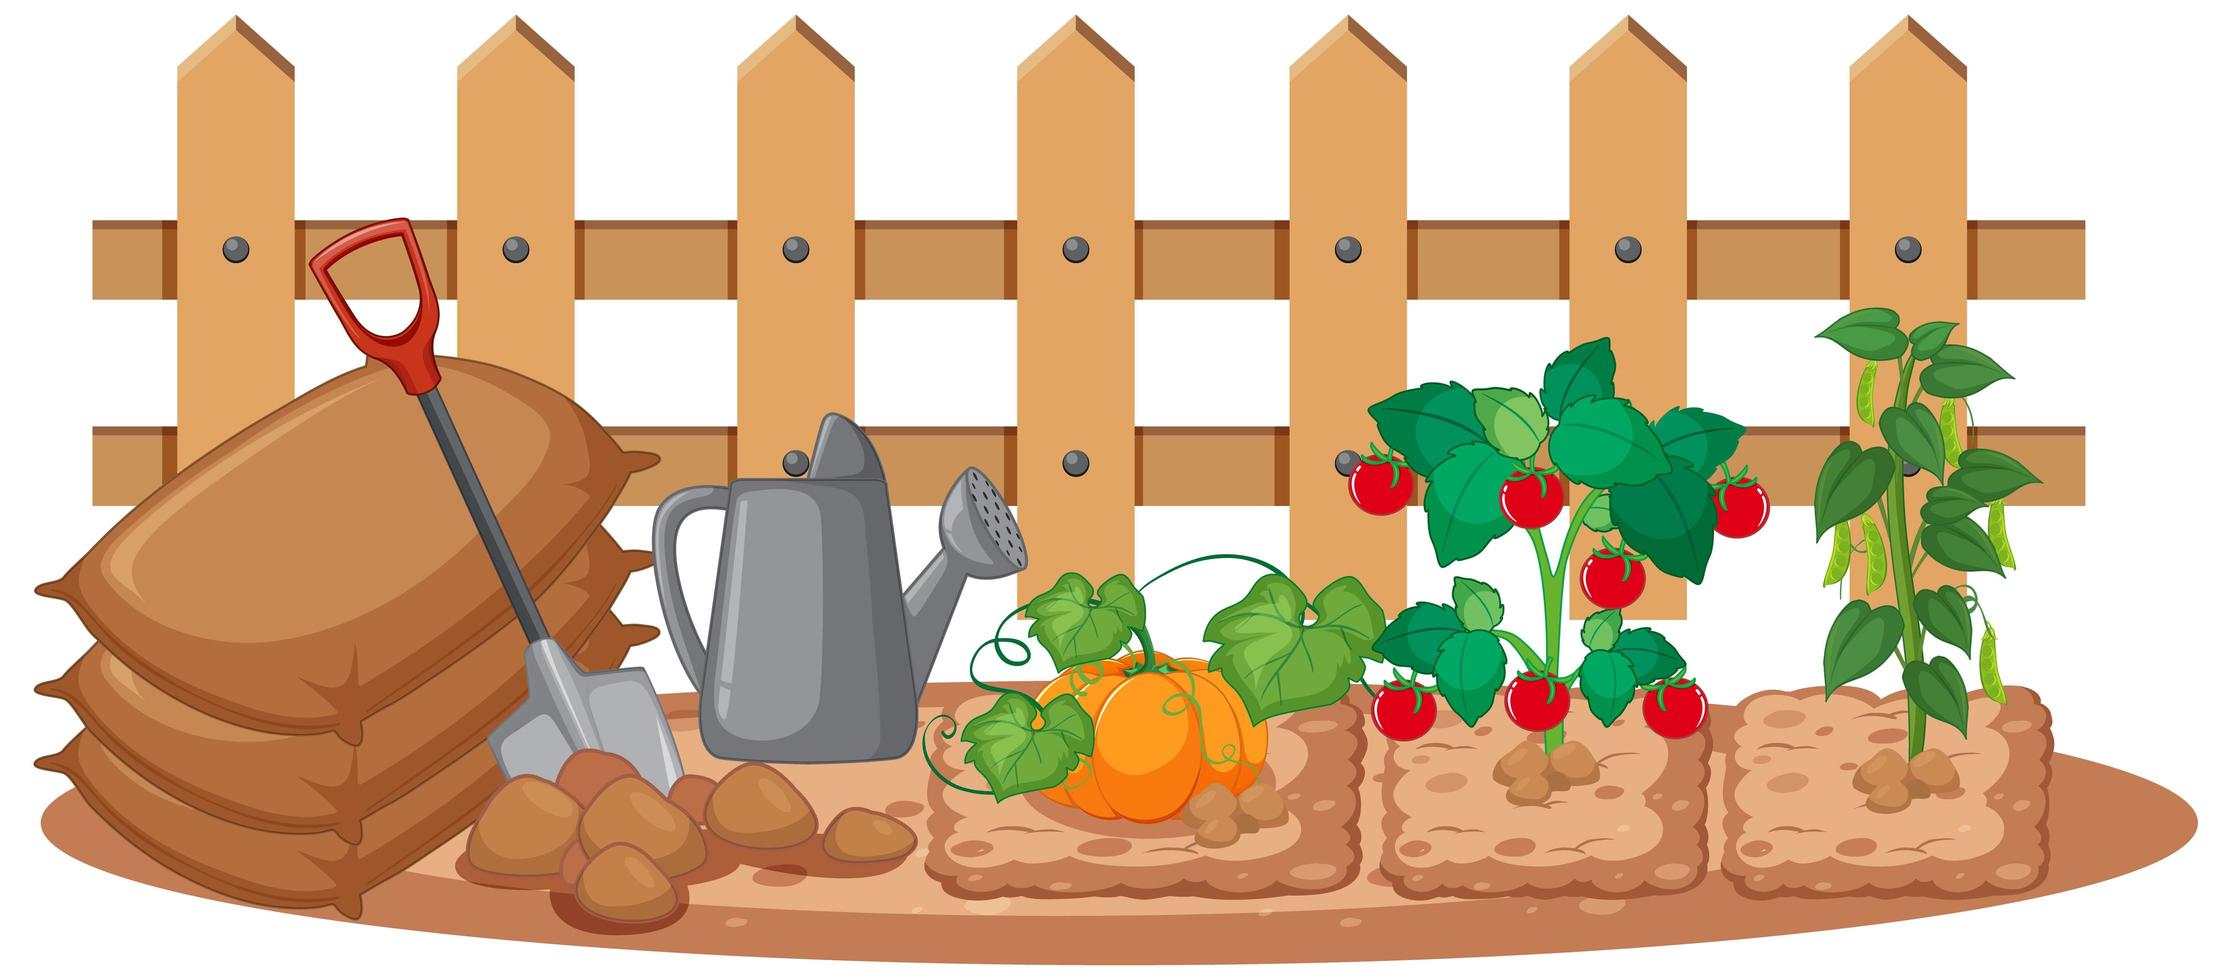 Vegetables growing in the garden on white background vector